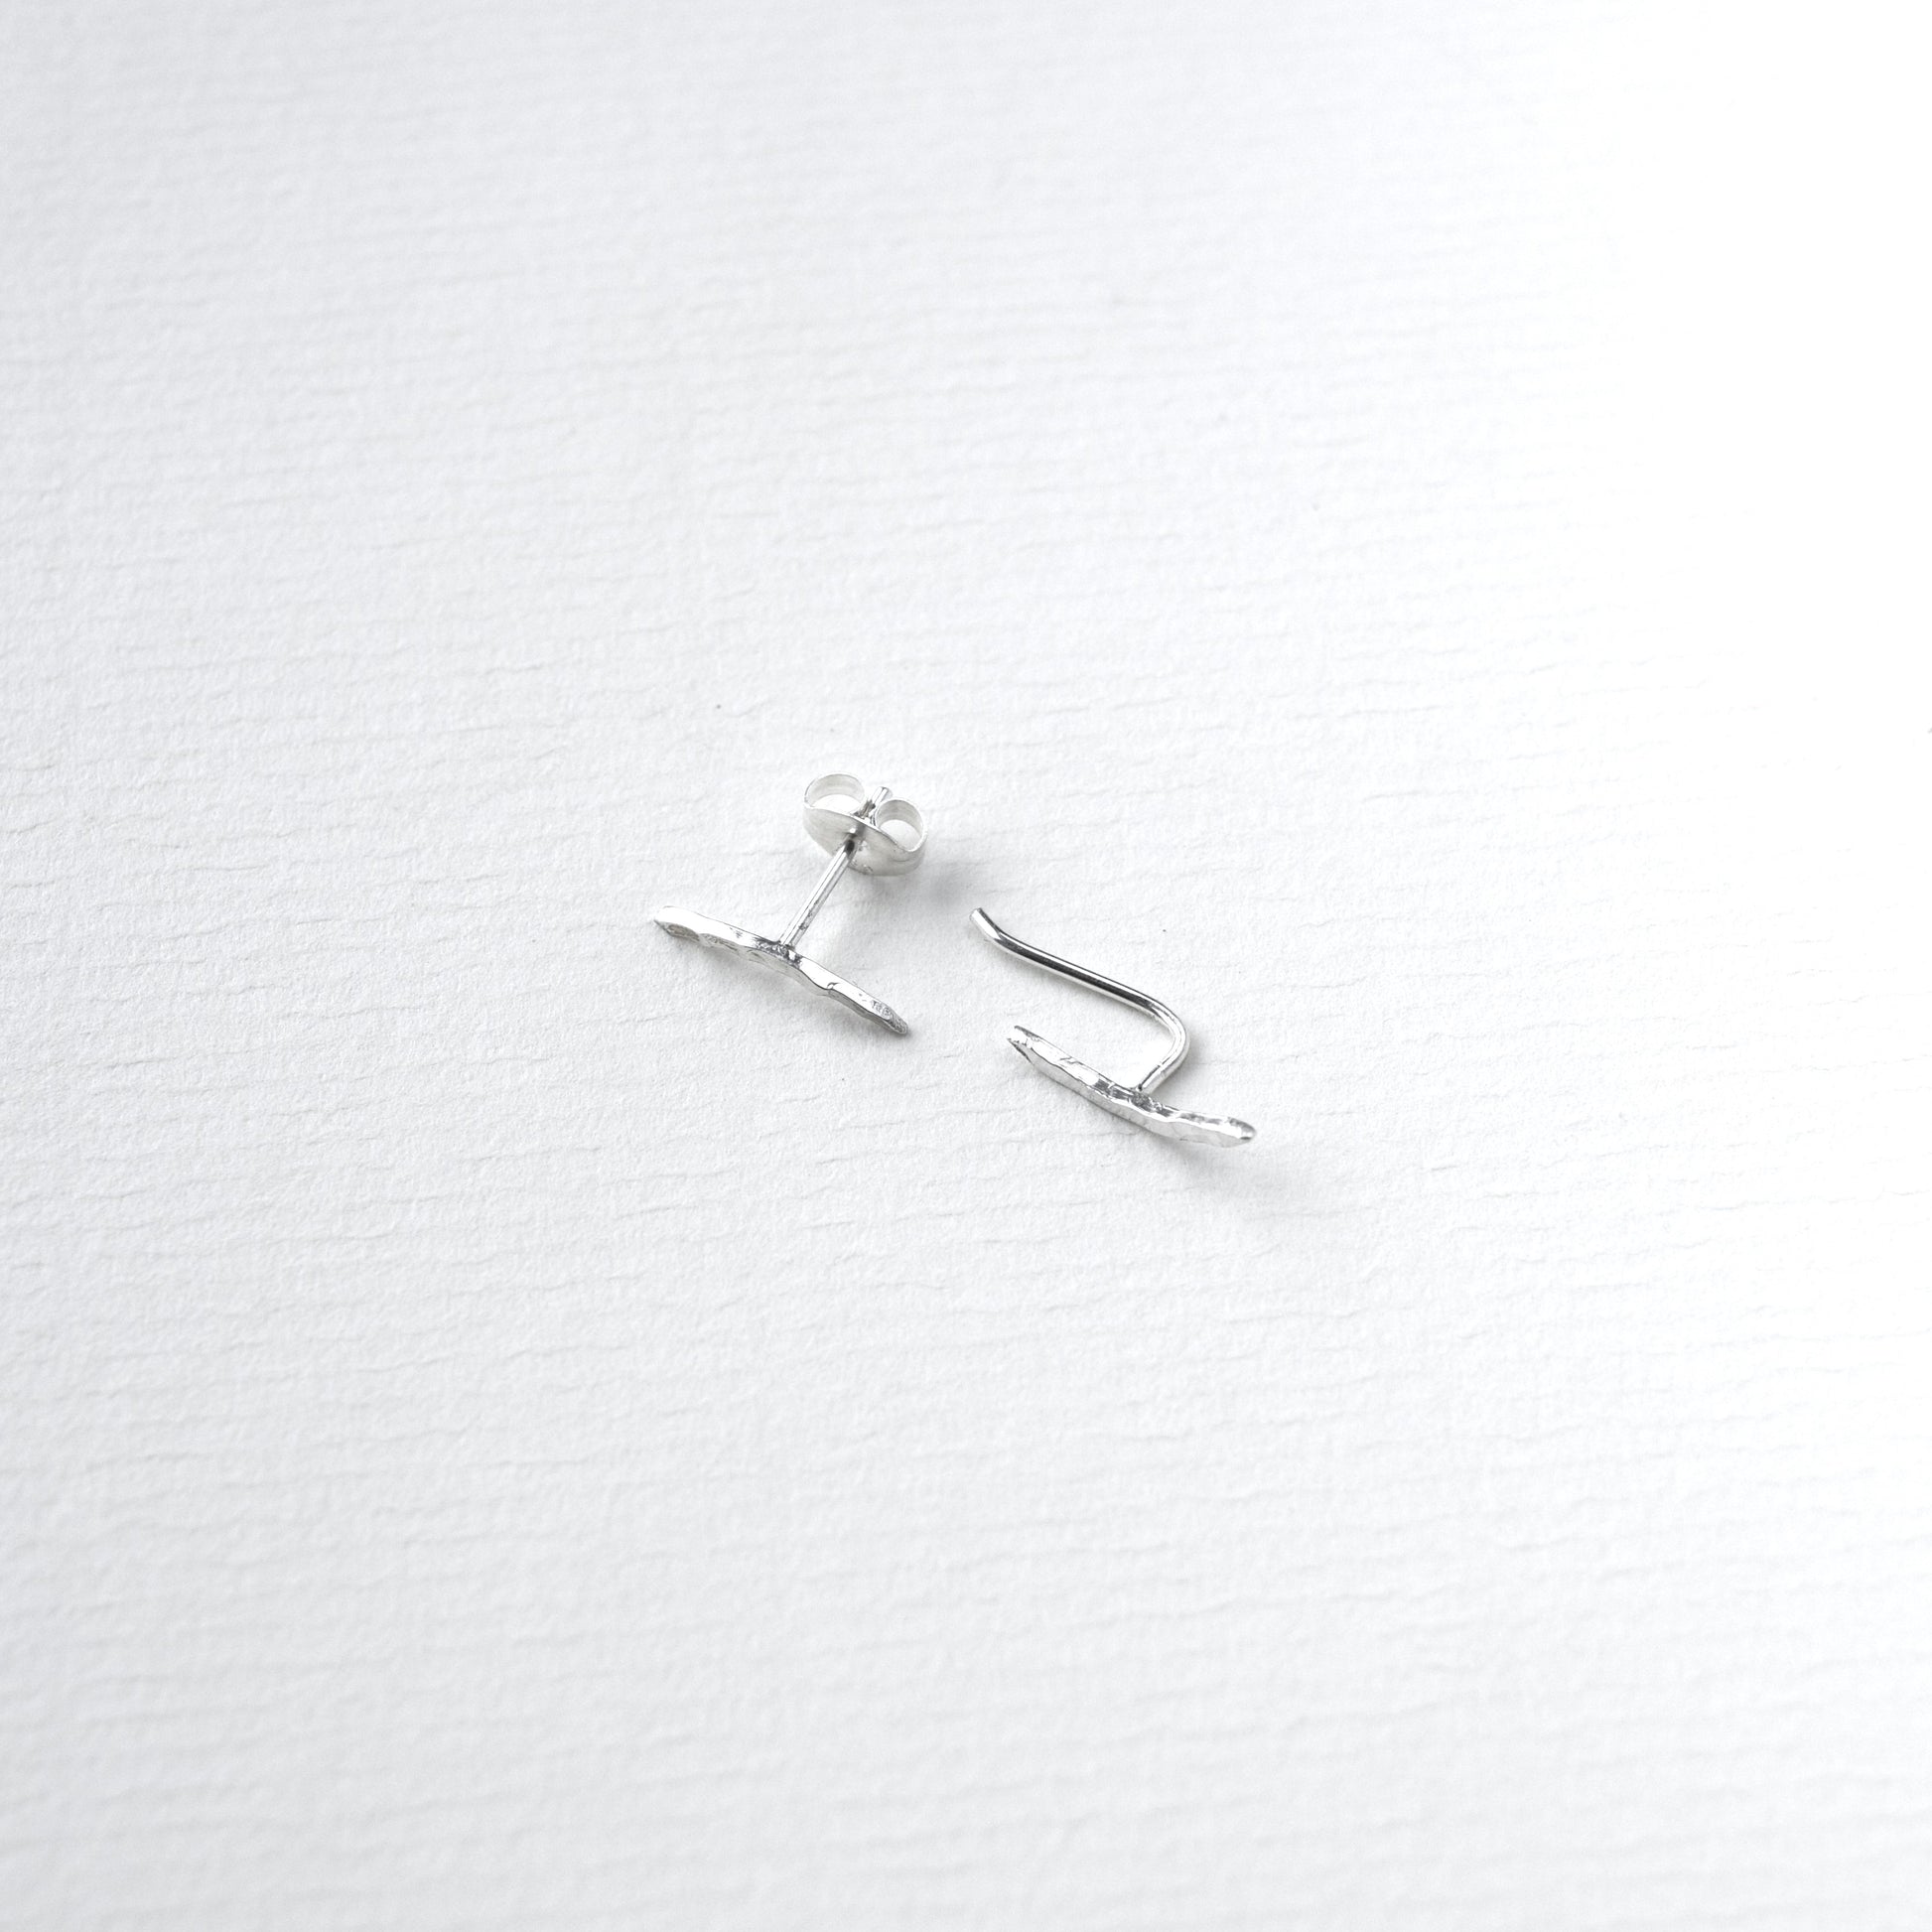 MUKA studio silver helix studs with two closure options; a traditional post and butterfly back and an elongated pin back which is great for sleeping in